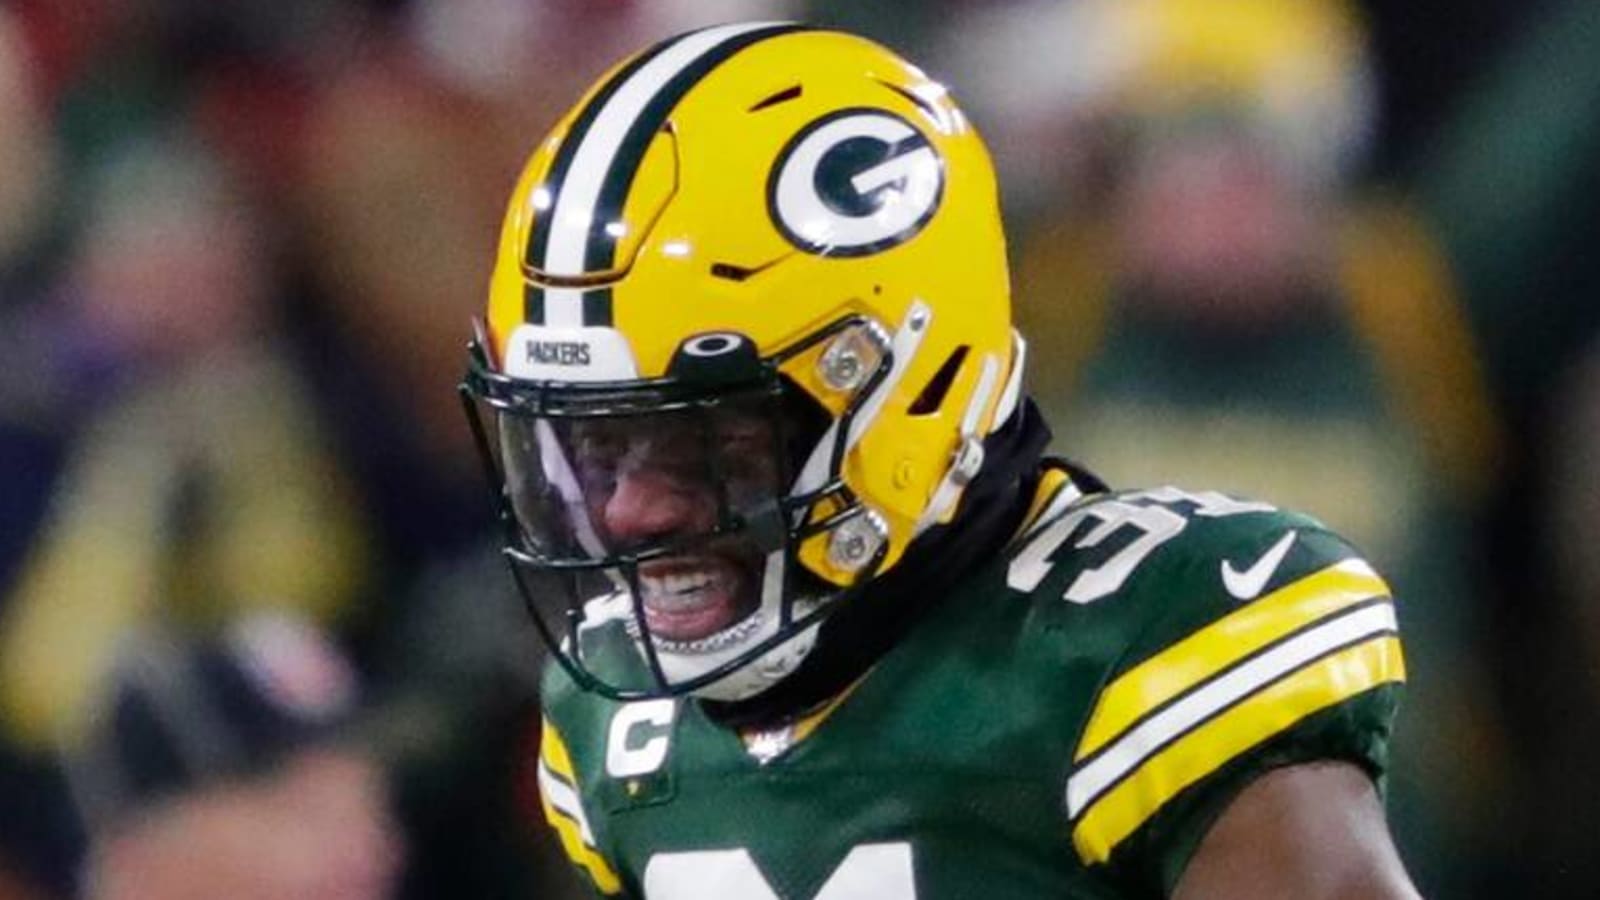 Packers' Amos wants to coach youth football after playing career